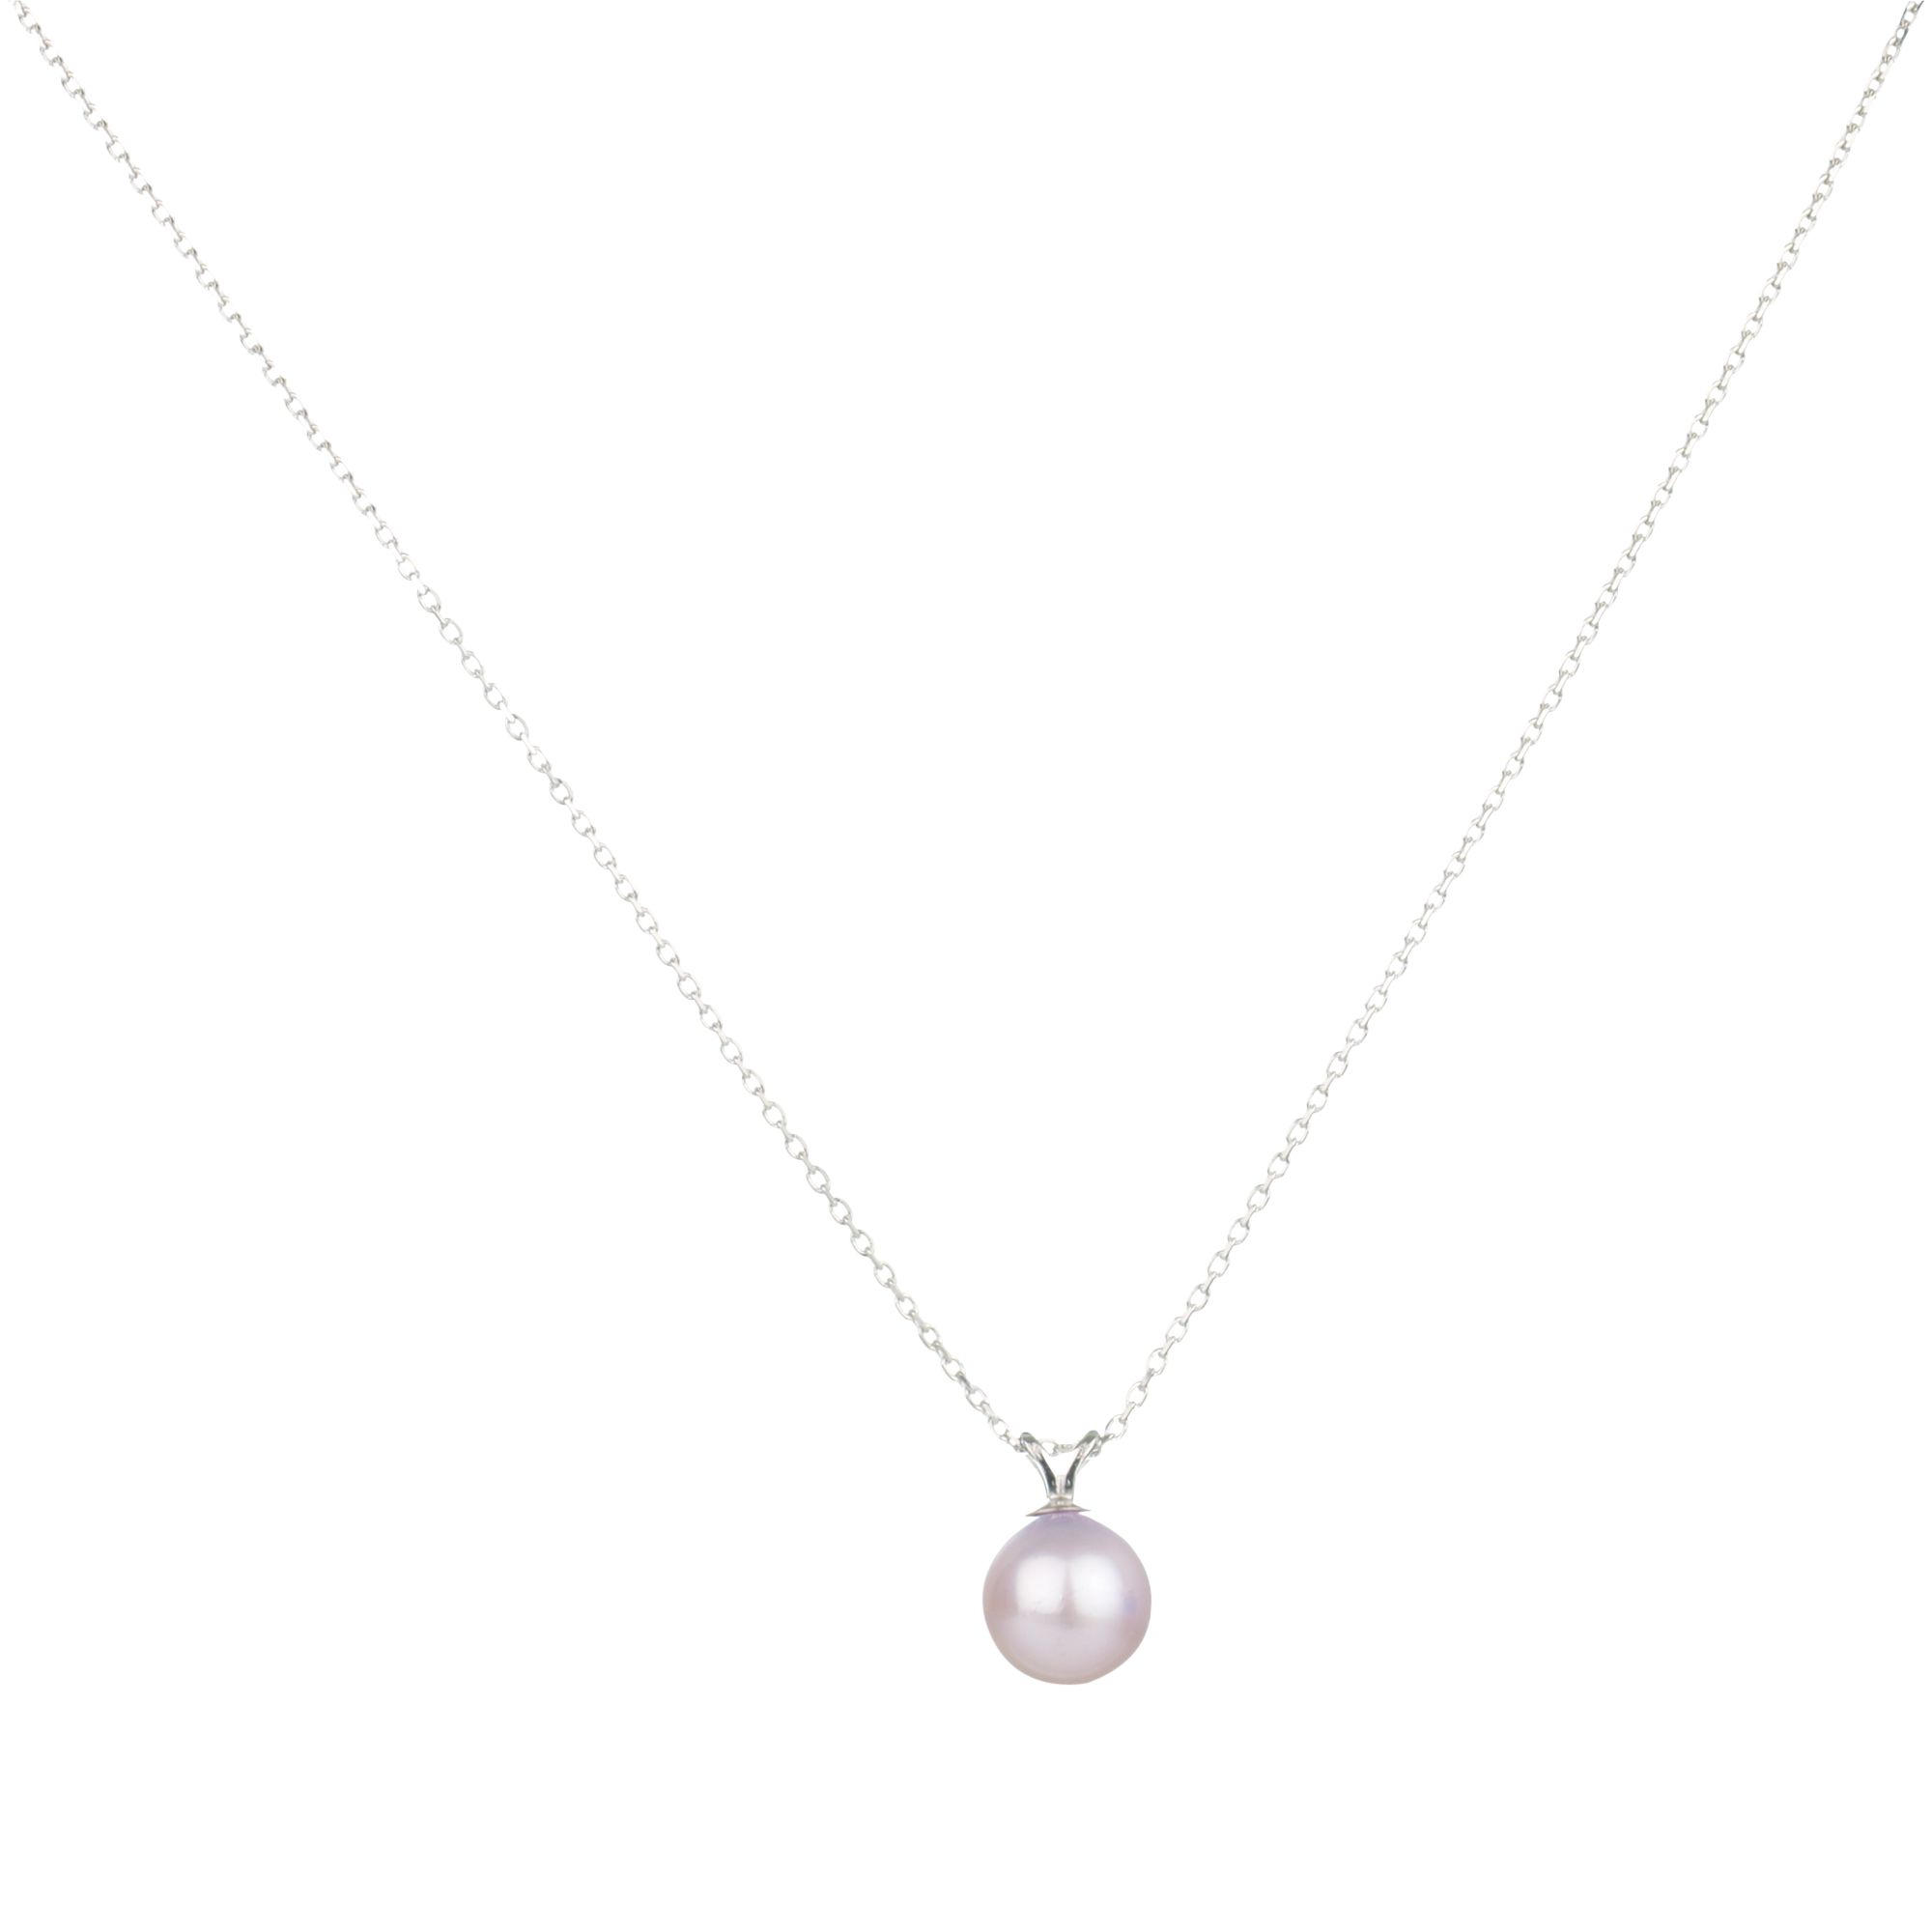 Buy A B Davis Freshwater Pearl Pendant Necklace Online at johnlewis ...